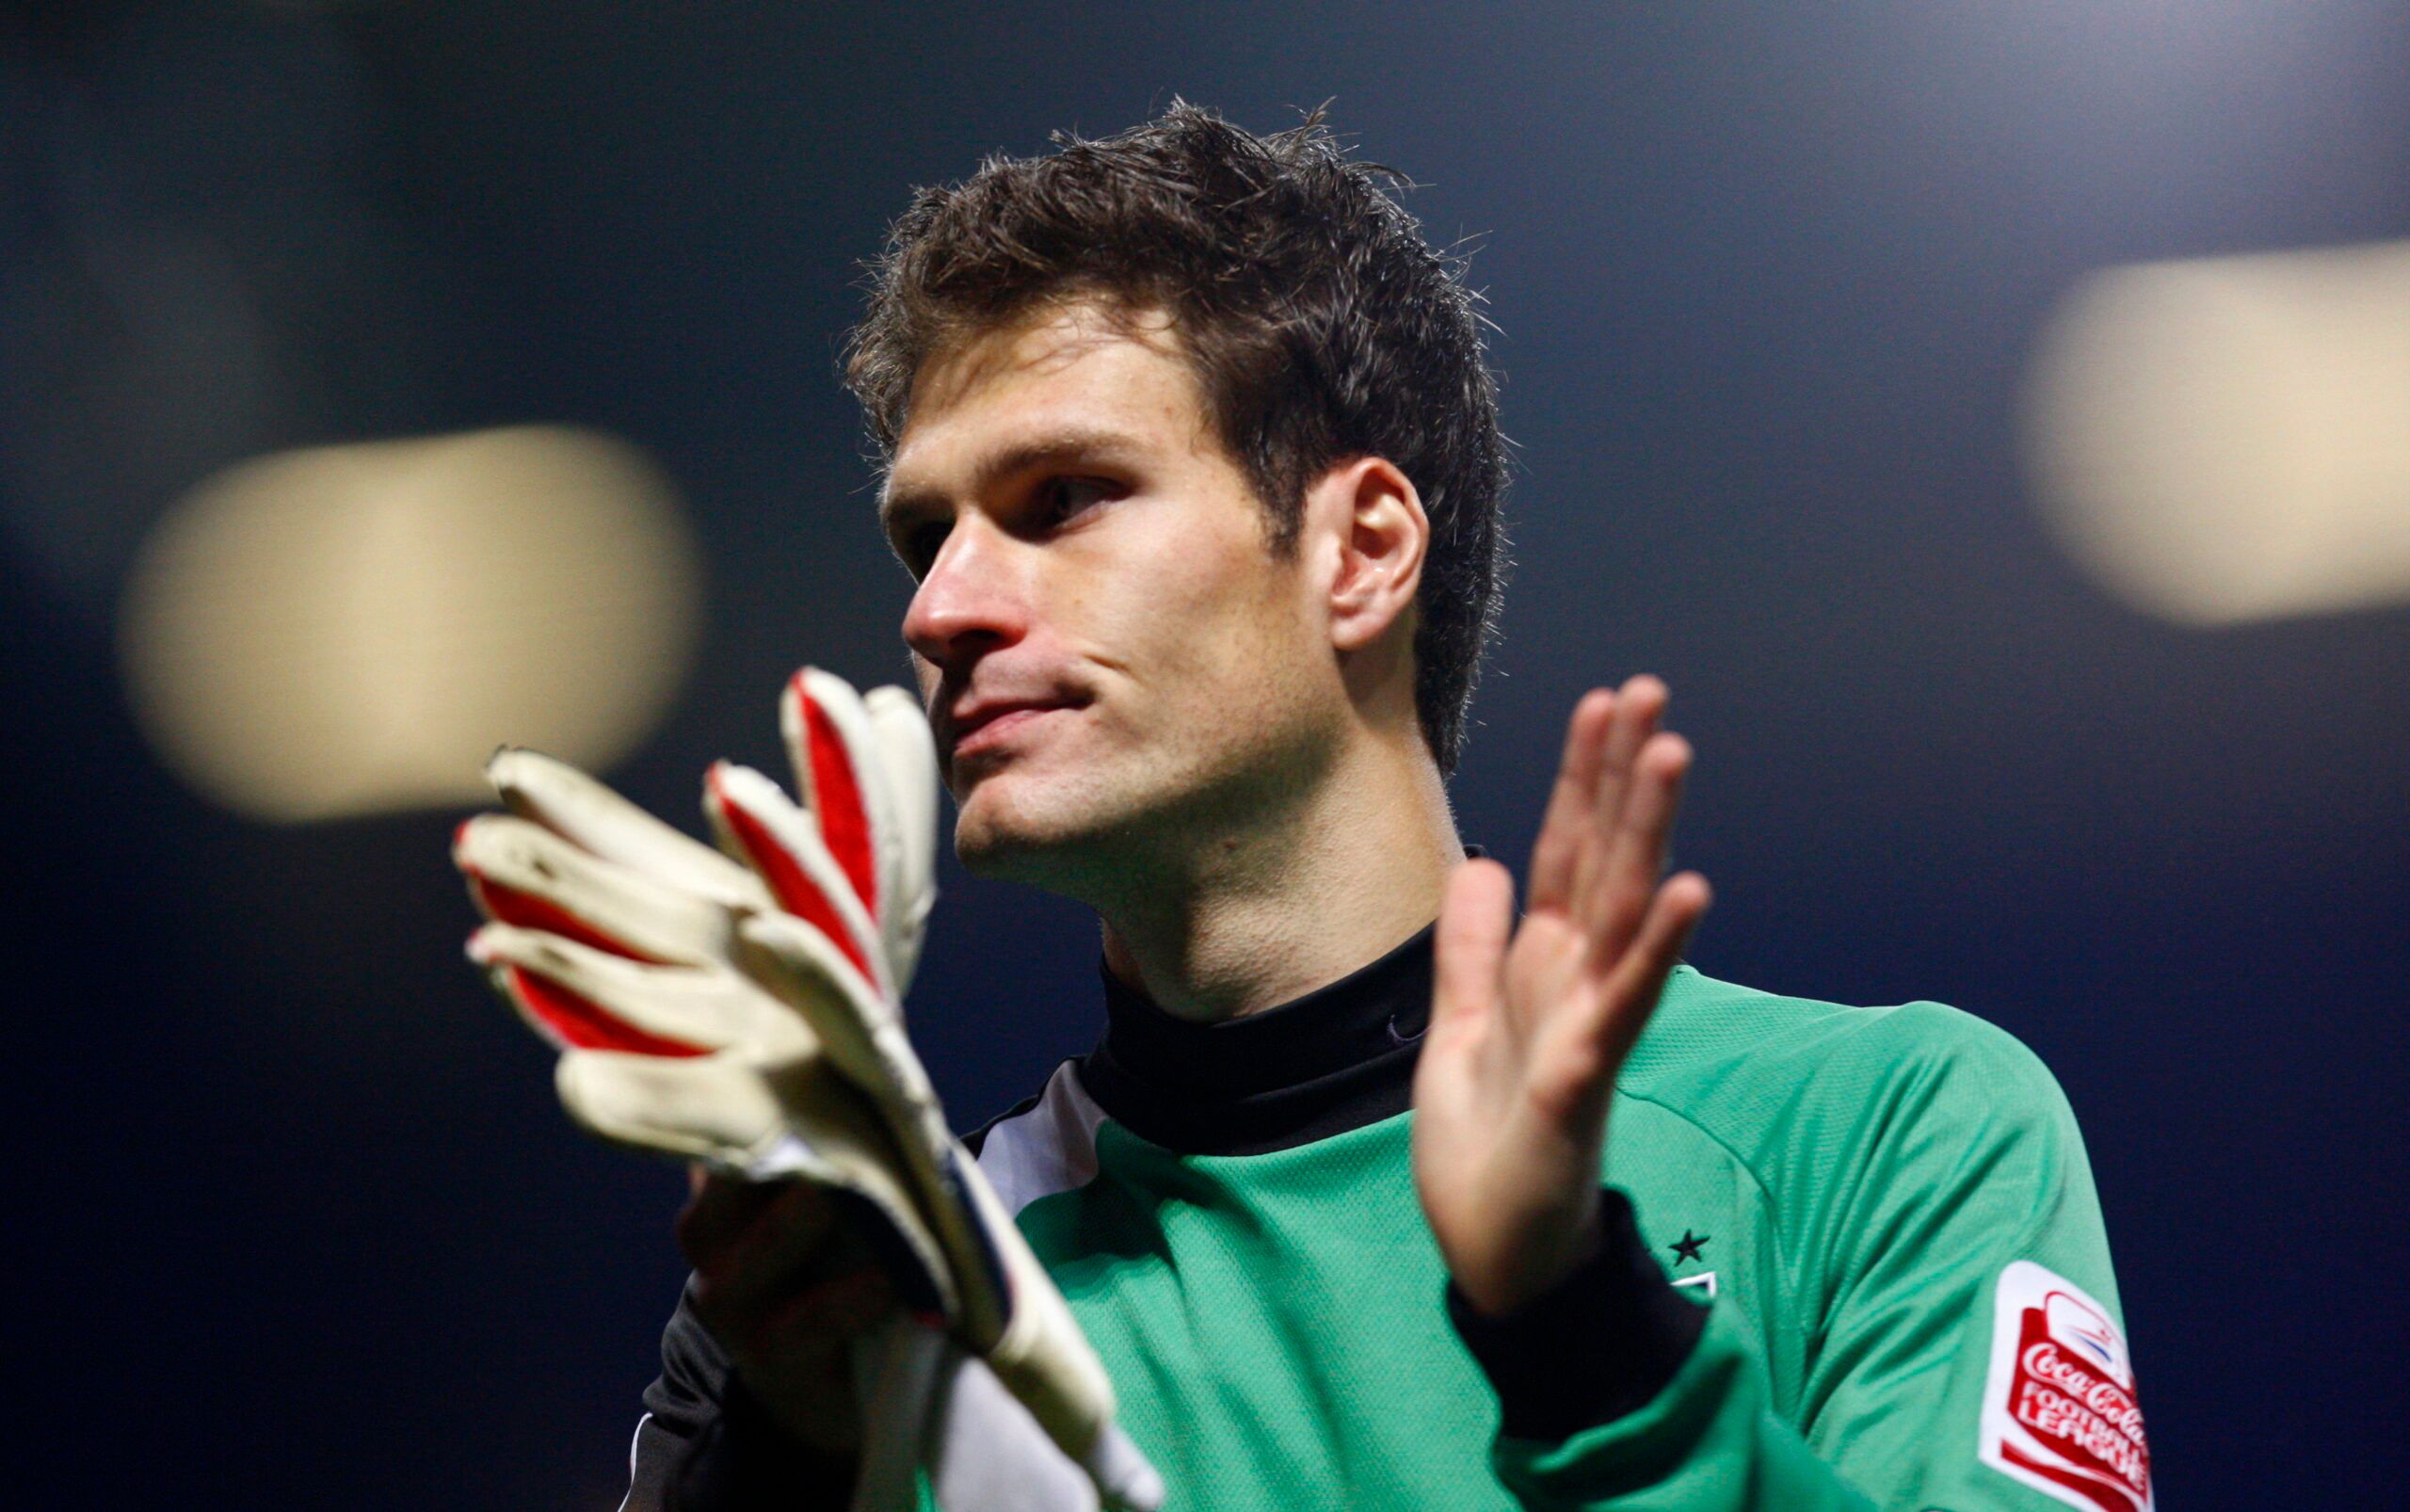 Football - Ipswich Town v Watford Coca-Cola Football League Championship - Portman Road - 09/10 - 20/10/09 
Asmir Begovic - Ipswich Town applauds fans at the end of the match 
Mandatory Credit: Action Images / Paul Harding